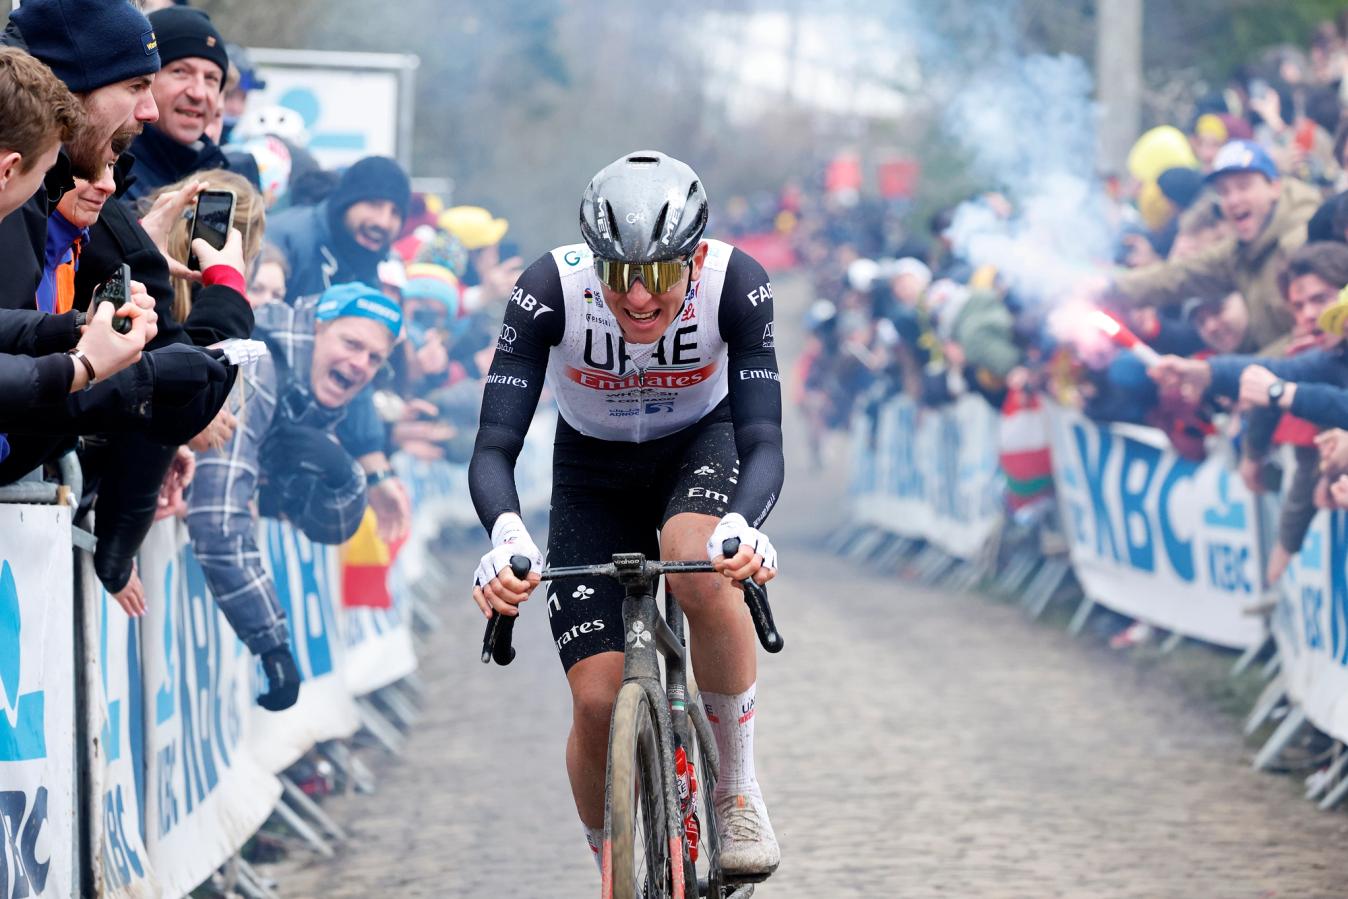 Tadej Pogačar was reward for his solo attack in last year's Tour of Flanders